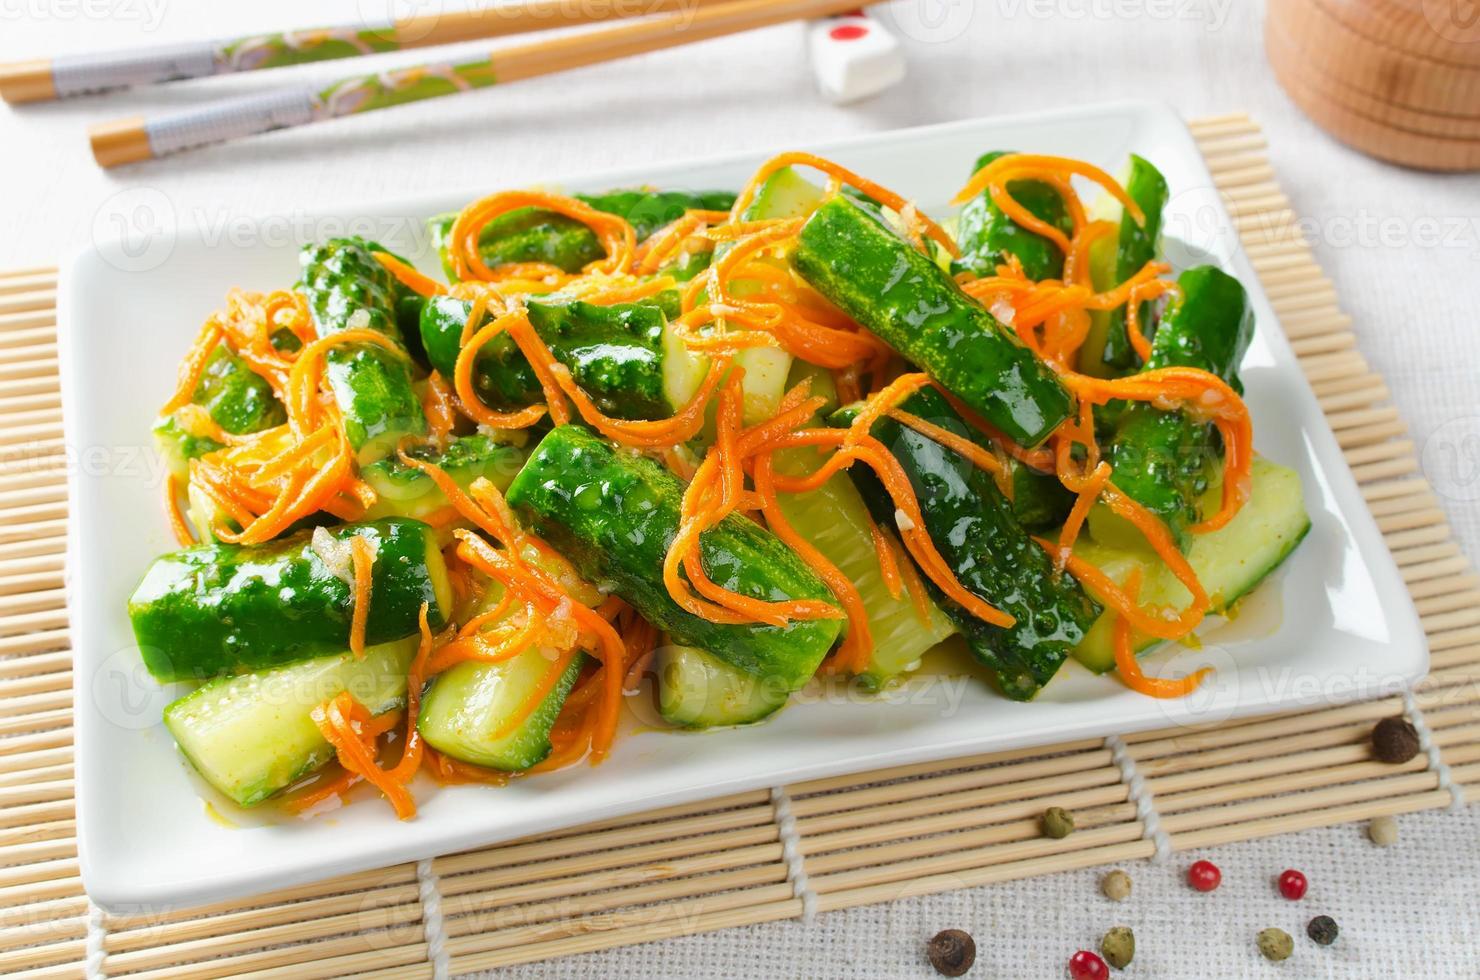 Cucumber salad with carrots photo